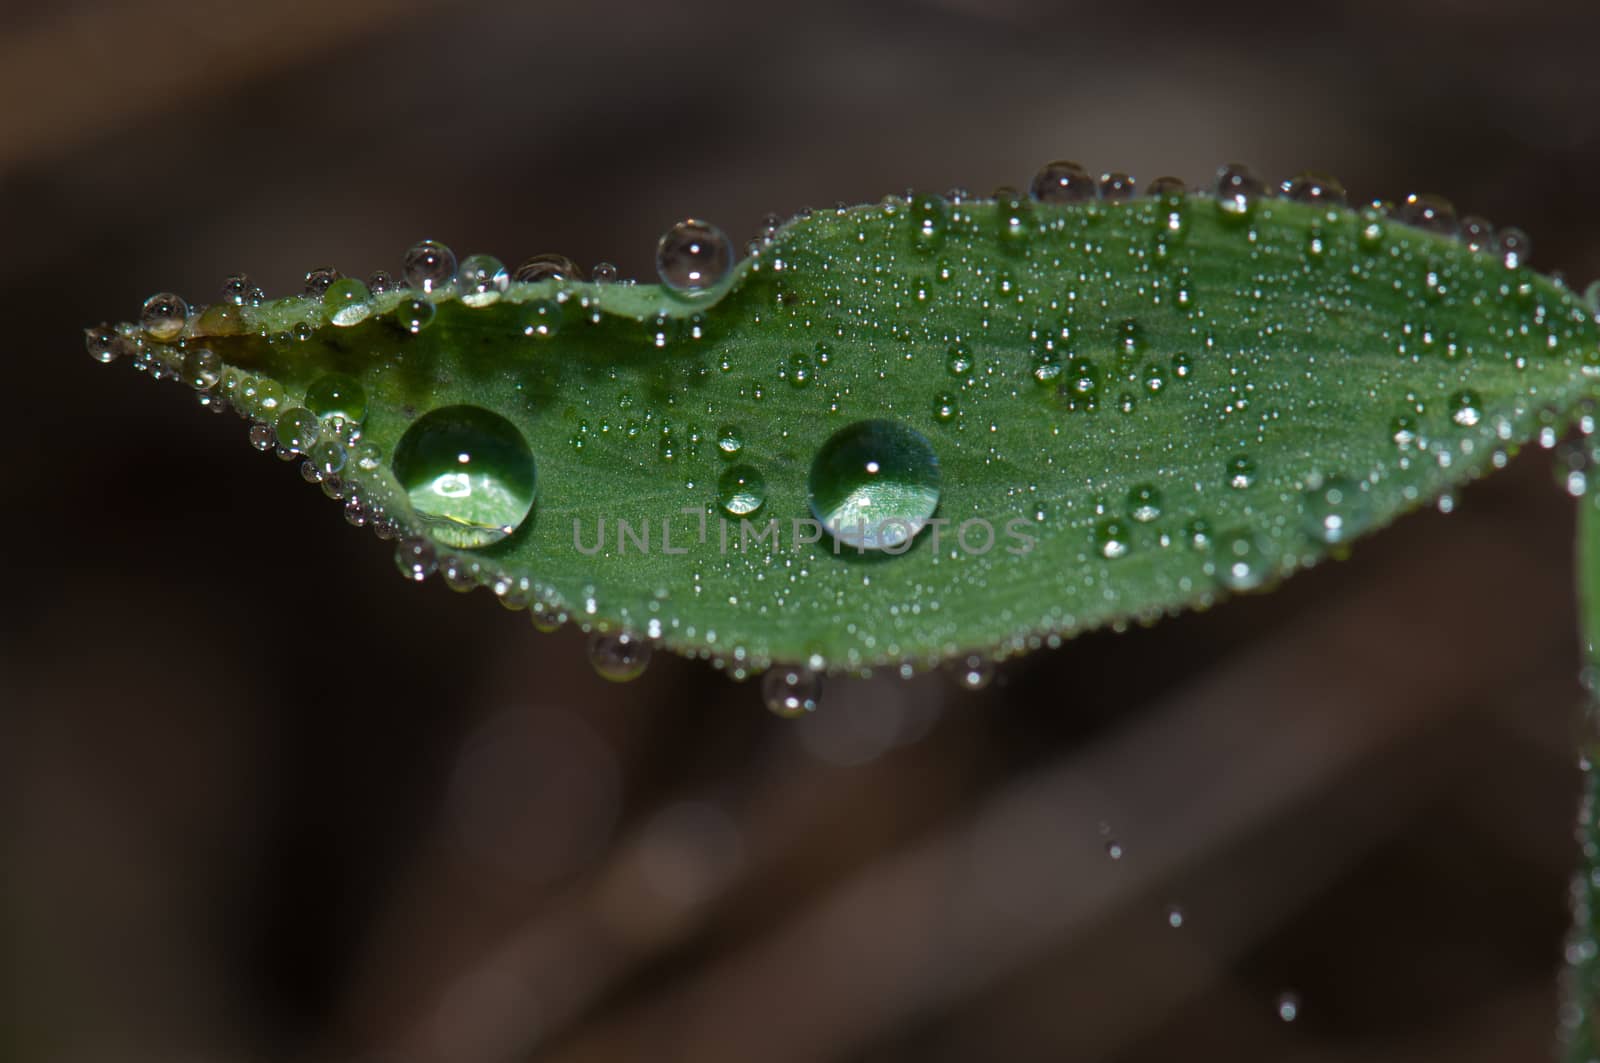 Leaf covered with dew drops. Integral Natural Reserve of Mencafete. Frontera. El Hierro. Canary Islands. Spain.